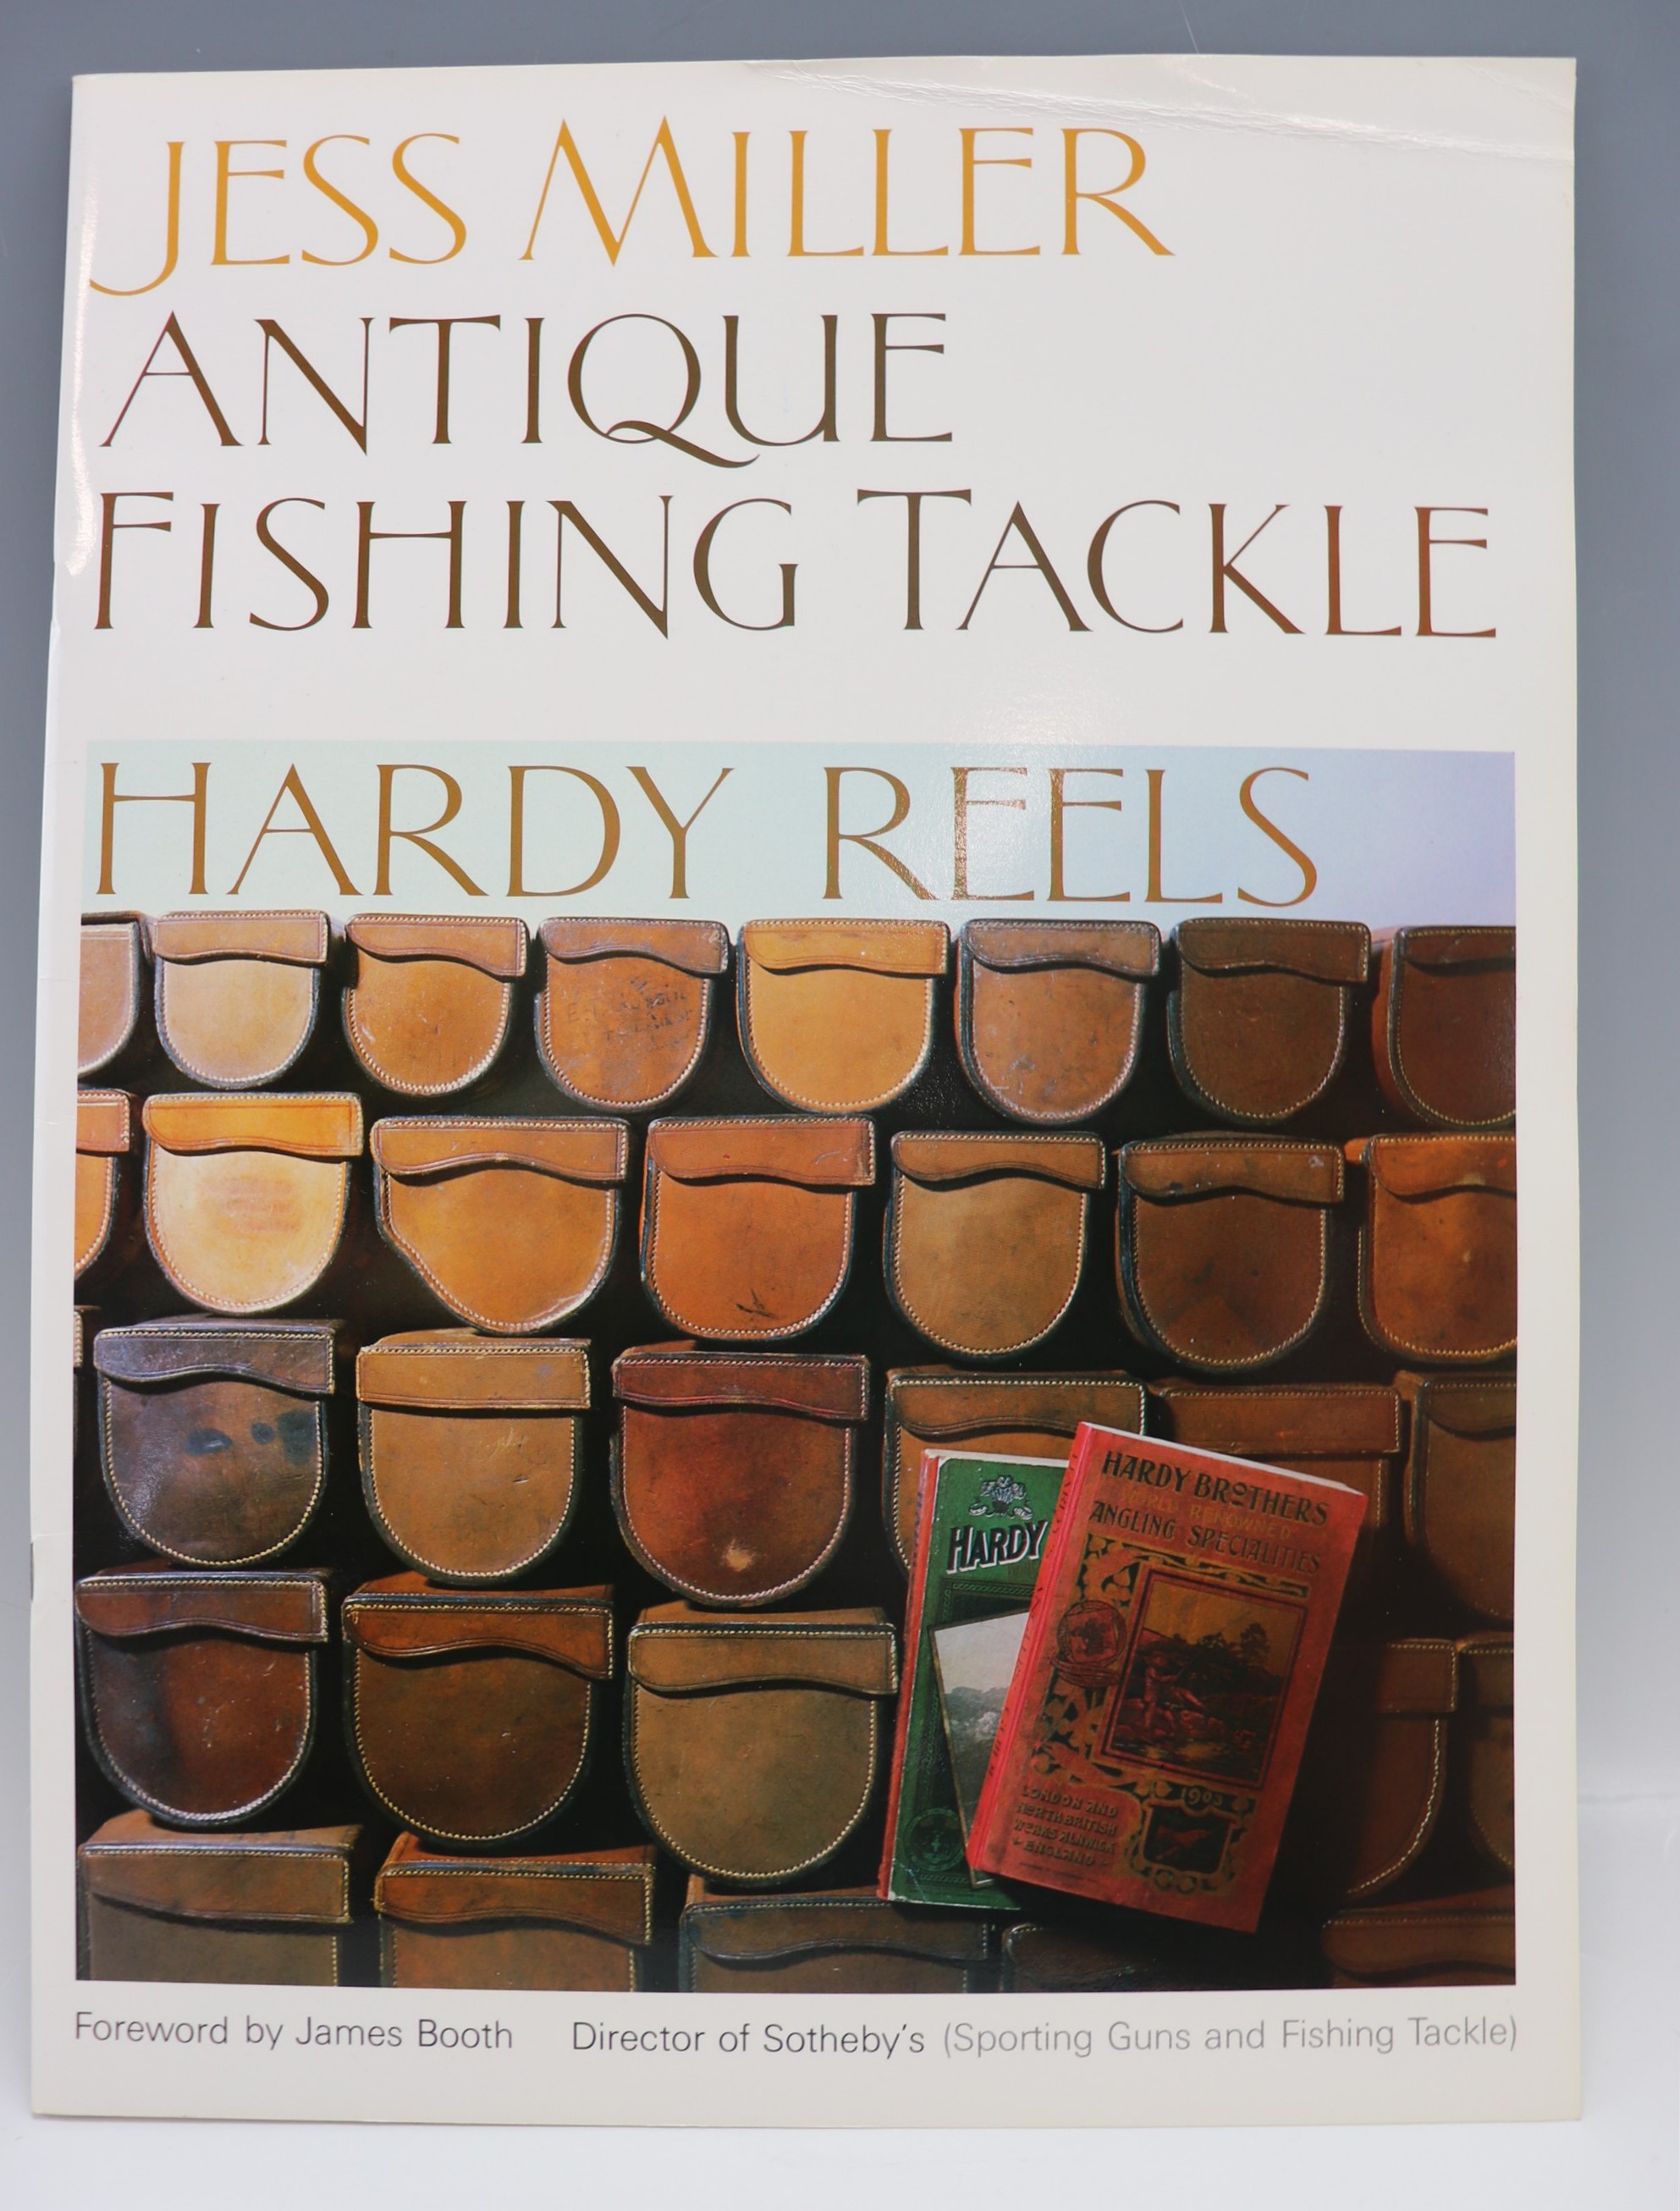 Jess Miller, "Antique Fishing Tackle", foreword by James Booth (Sotheby's), 1987